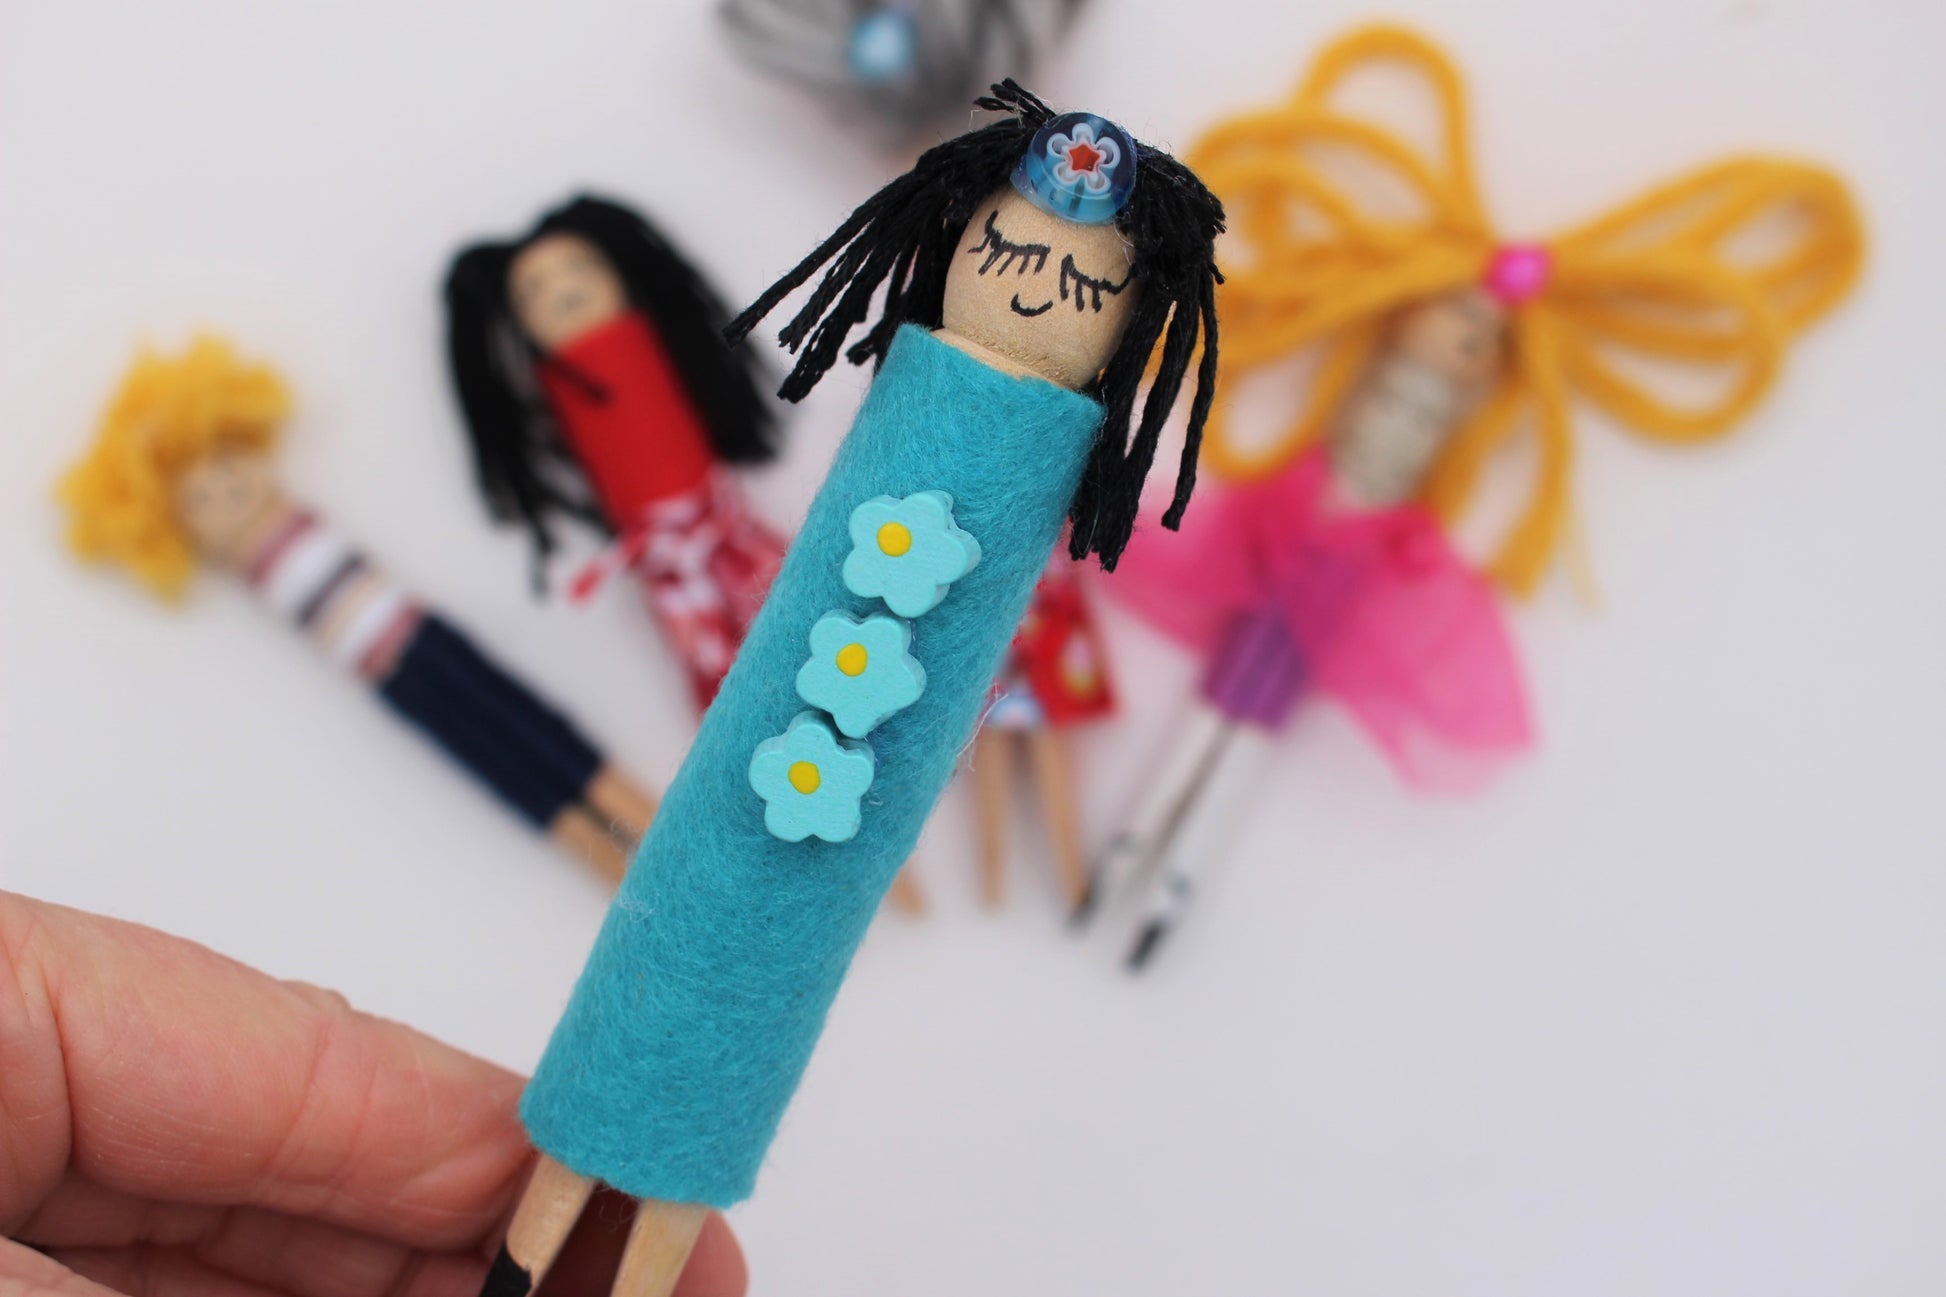 Hand made wooden peg dolls made from a kids craft kit